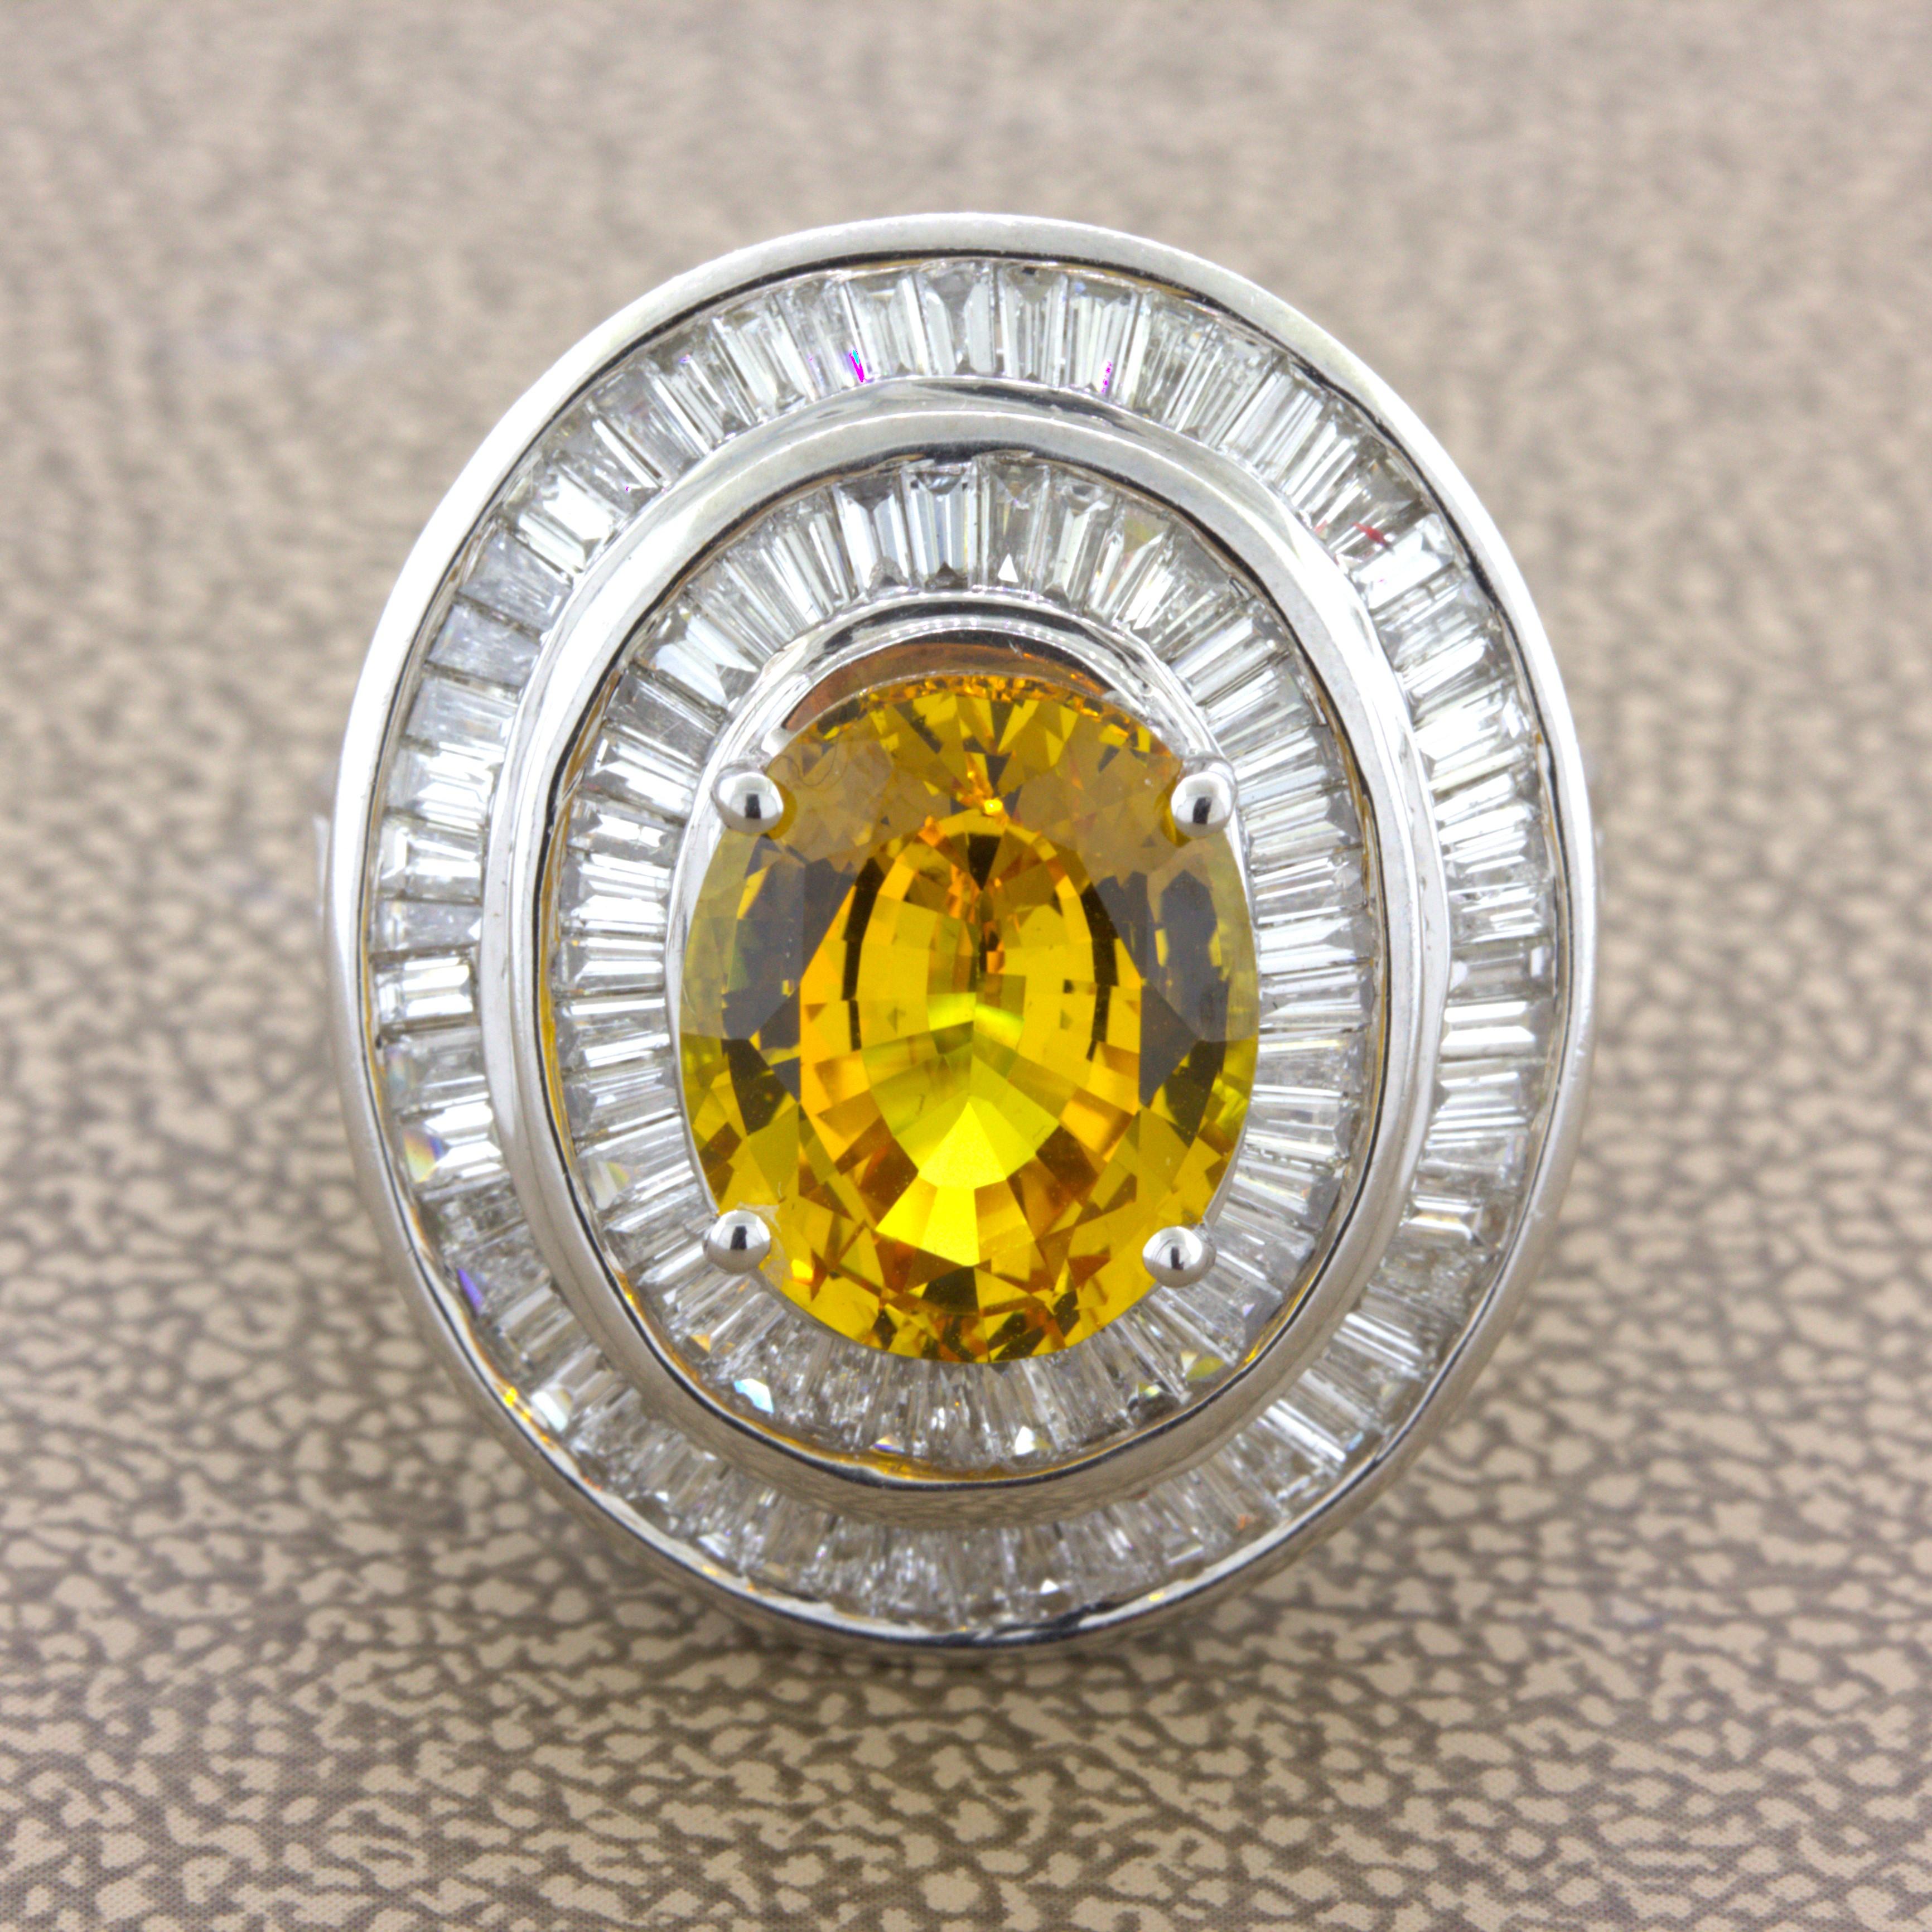 A vibrant and glowing fancy yellow sapphire takes center stage! It weighs 4.64 carats and has an intense bright yellow color that shines in the light. It is complemented by 2.28 carats of baguette-cut diamonds set around the sapphire in a double